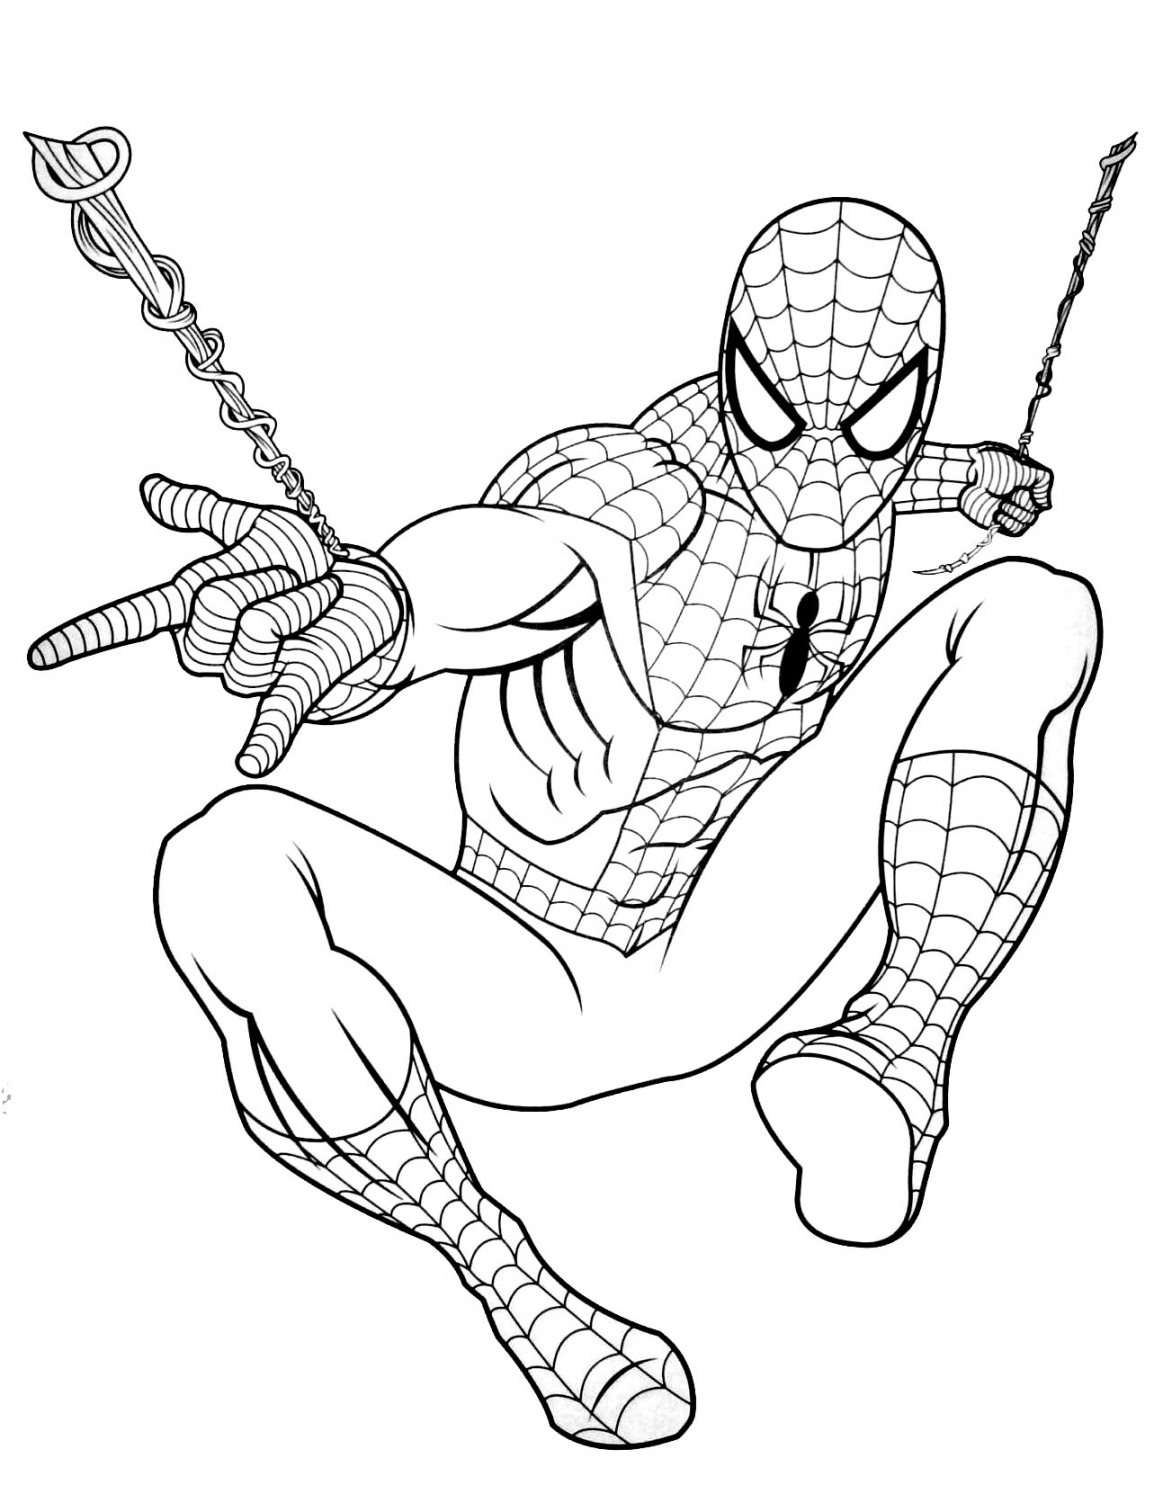 Spider Man Free Printable Coloring Pages - Printable - Free Spiderman drawing to print and color - Spiderman Kids